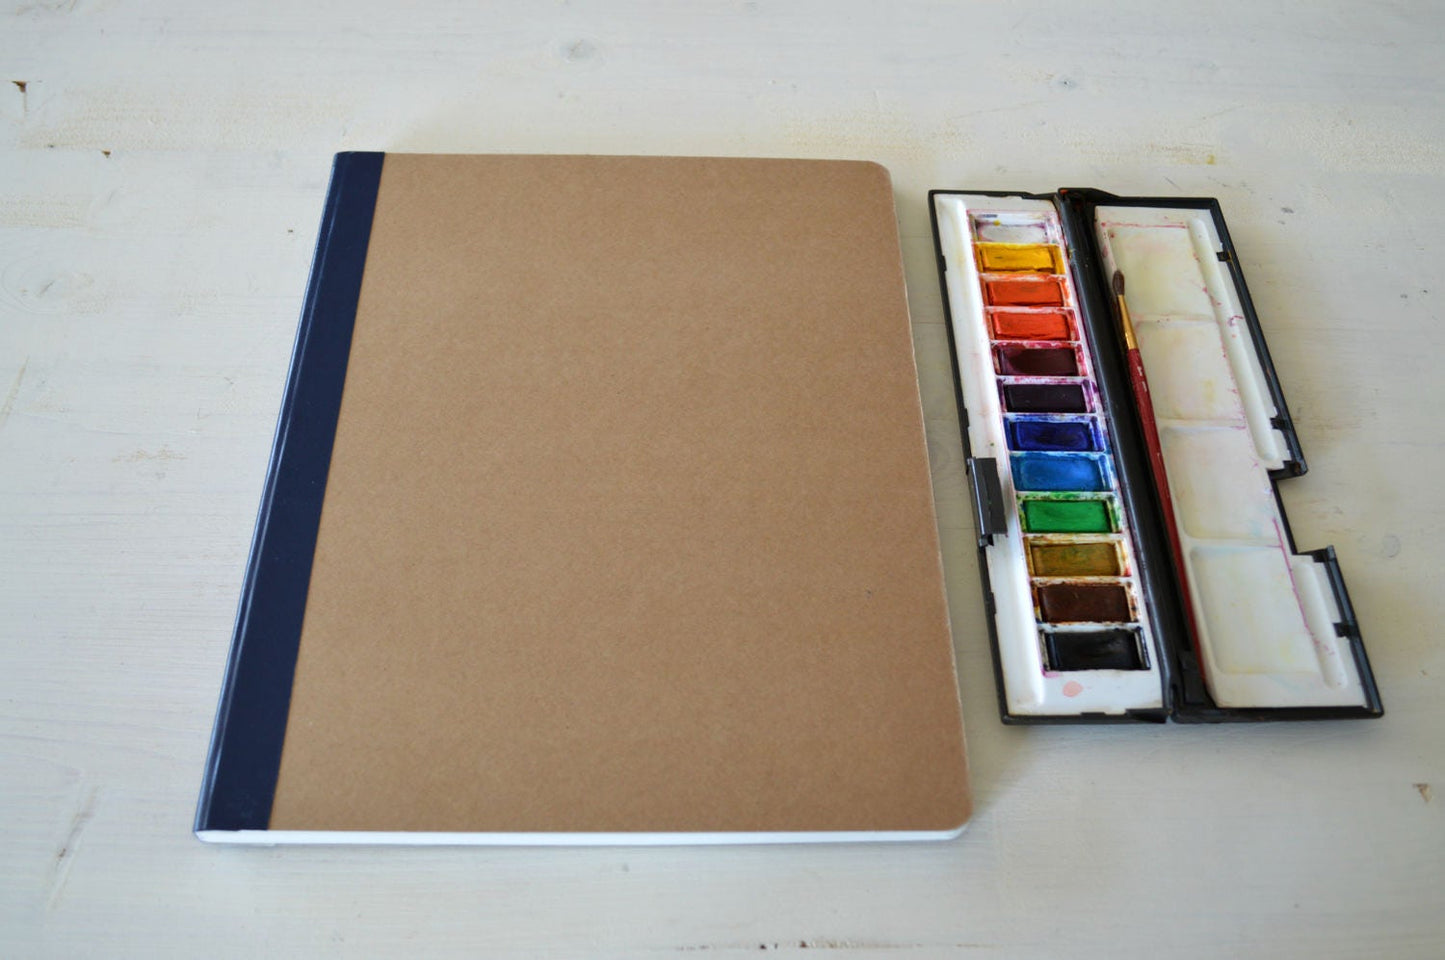 Extra Large Sketchbook 9" x 11.8" (23x30 cm), Artist Art Journal with 300 gsm Fabriano Mixed Media paper, Gift for Creative Artist Portfolio